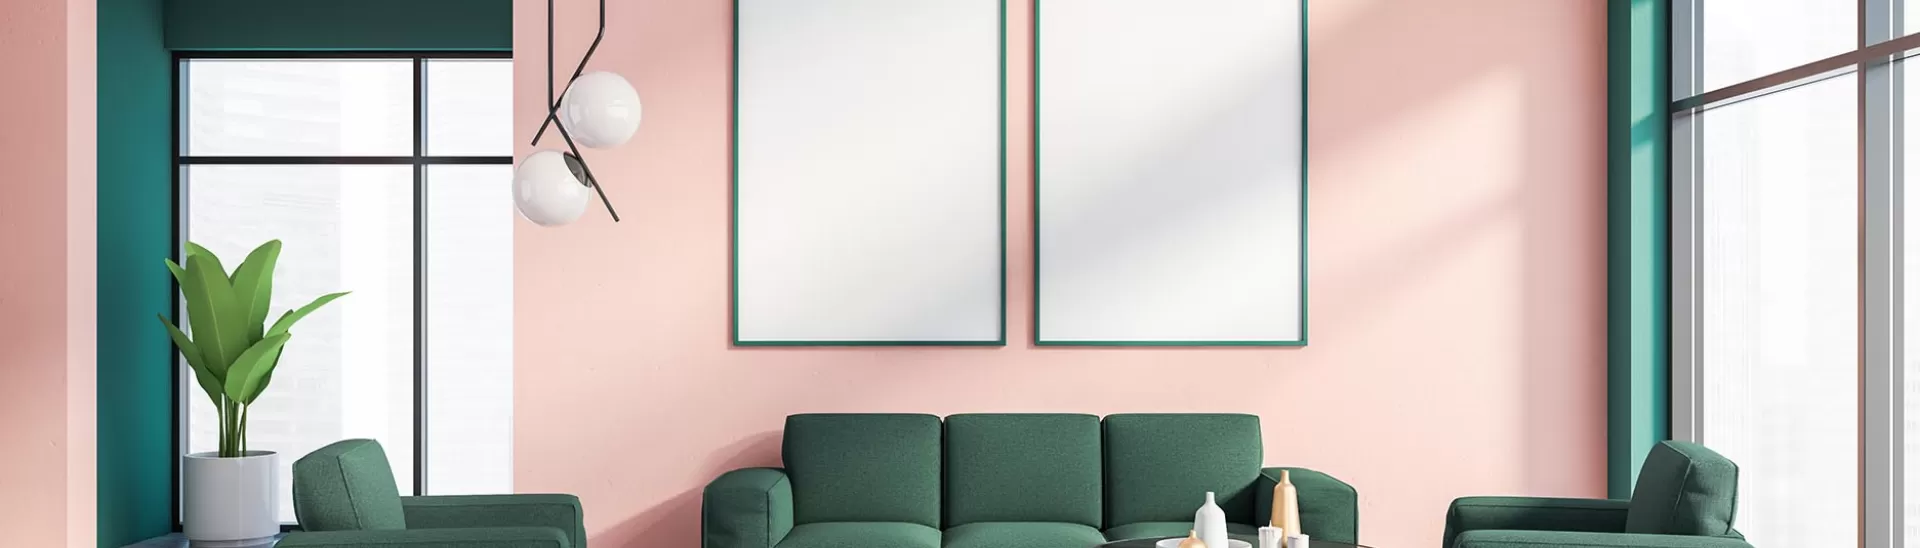 6 Colour Shades for Your Home to Help You Relax